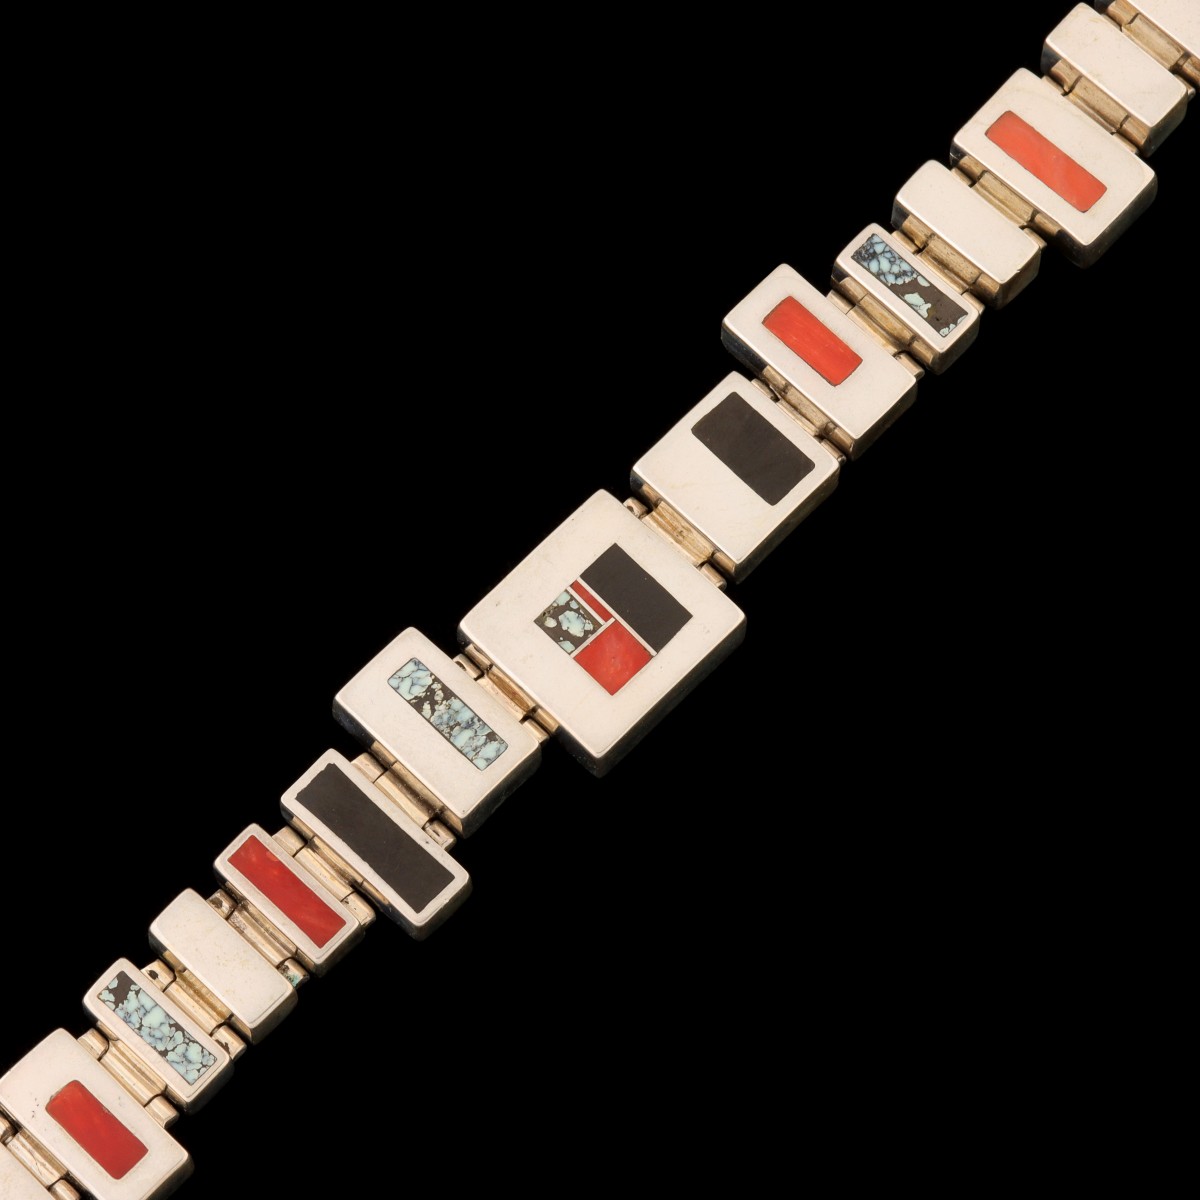 A RAY TRACEY MODERN DESIGN STERLING BRACELET WITH INLAY